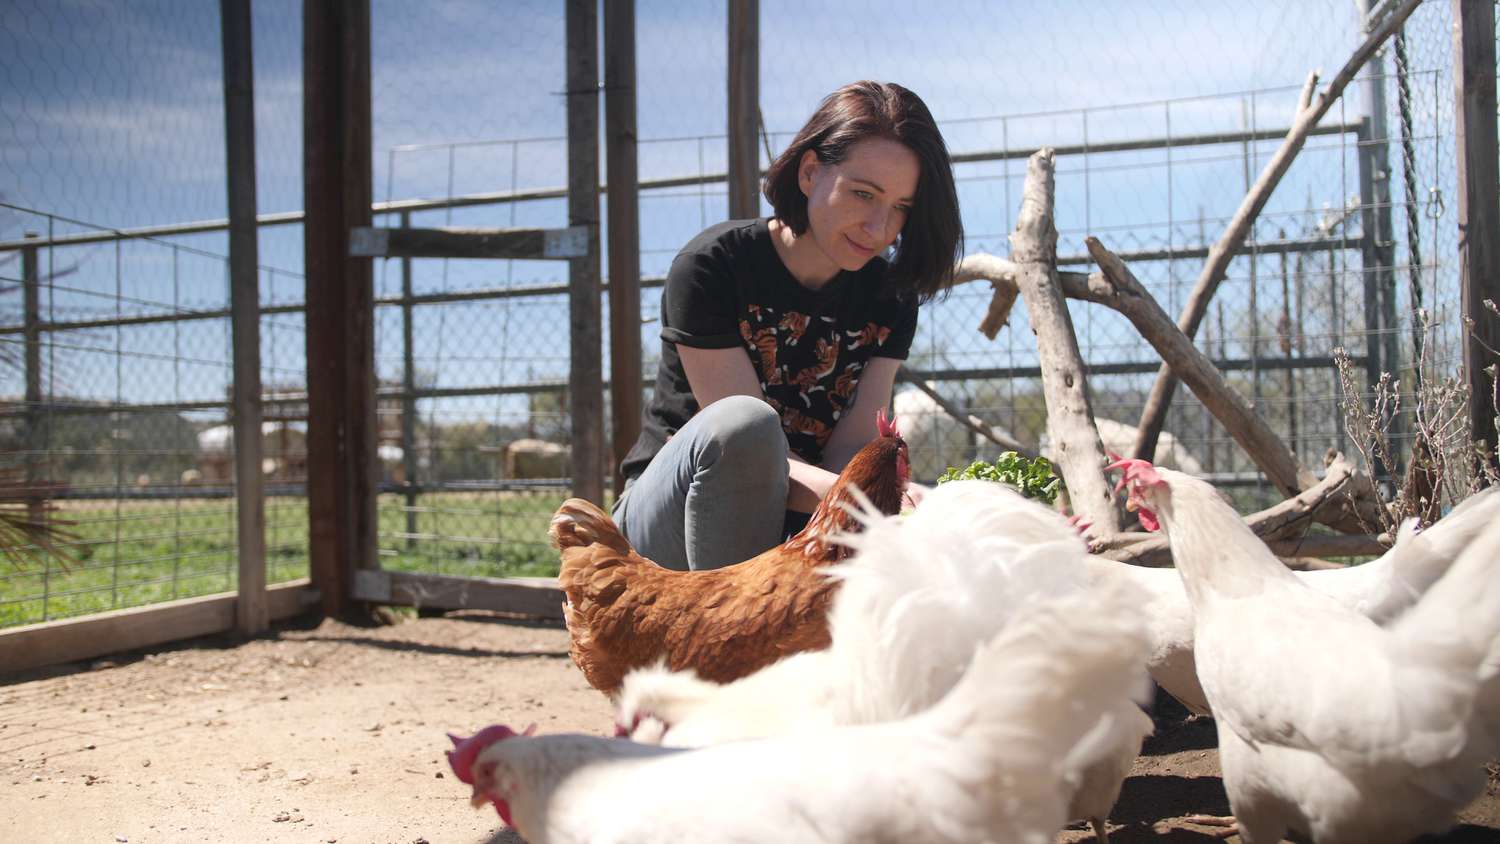 From Grassroots to Global, Group Works to Improve Animal Conditions